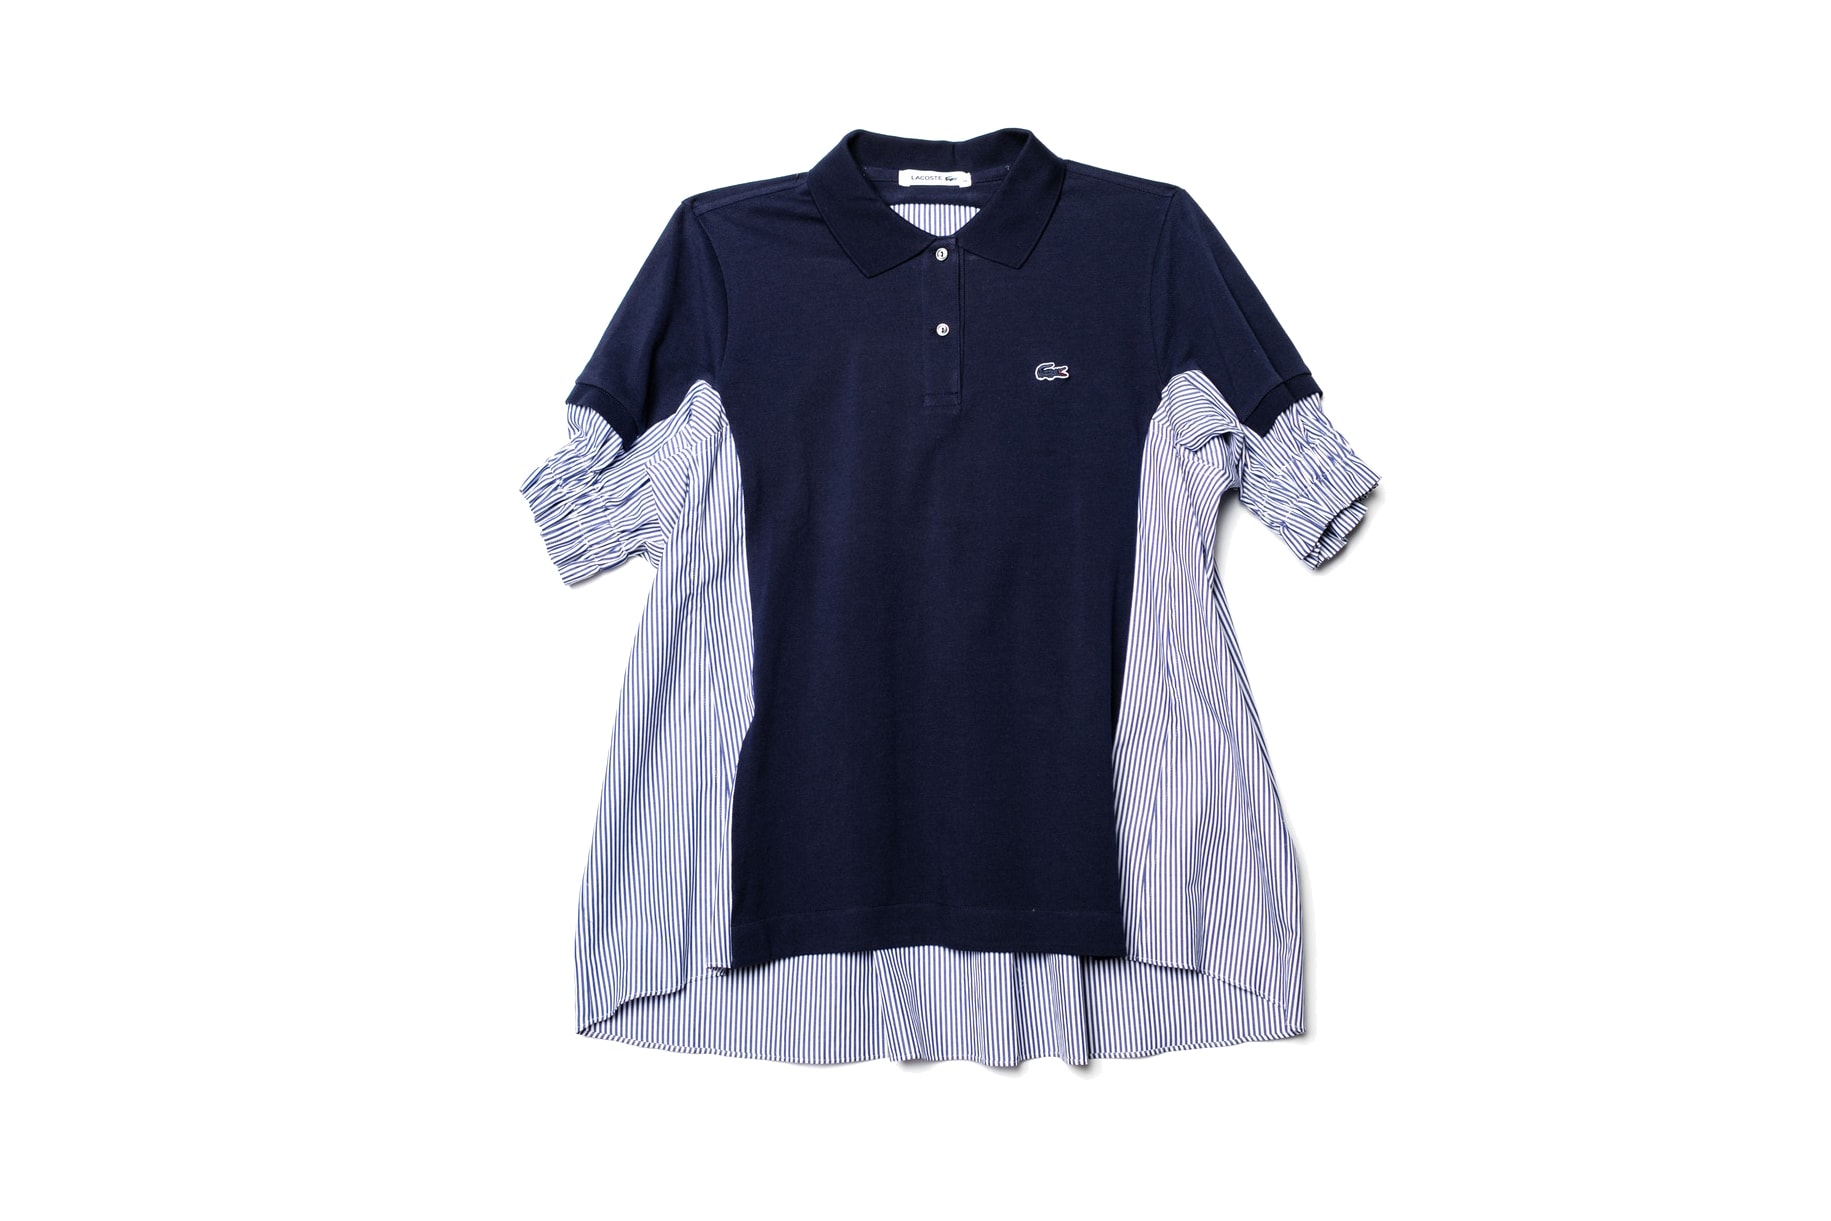 Lacoste Sacai New 2017 Collaboration Polo Sweaters jumpers drews blouses tops tennis